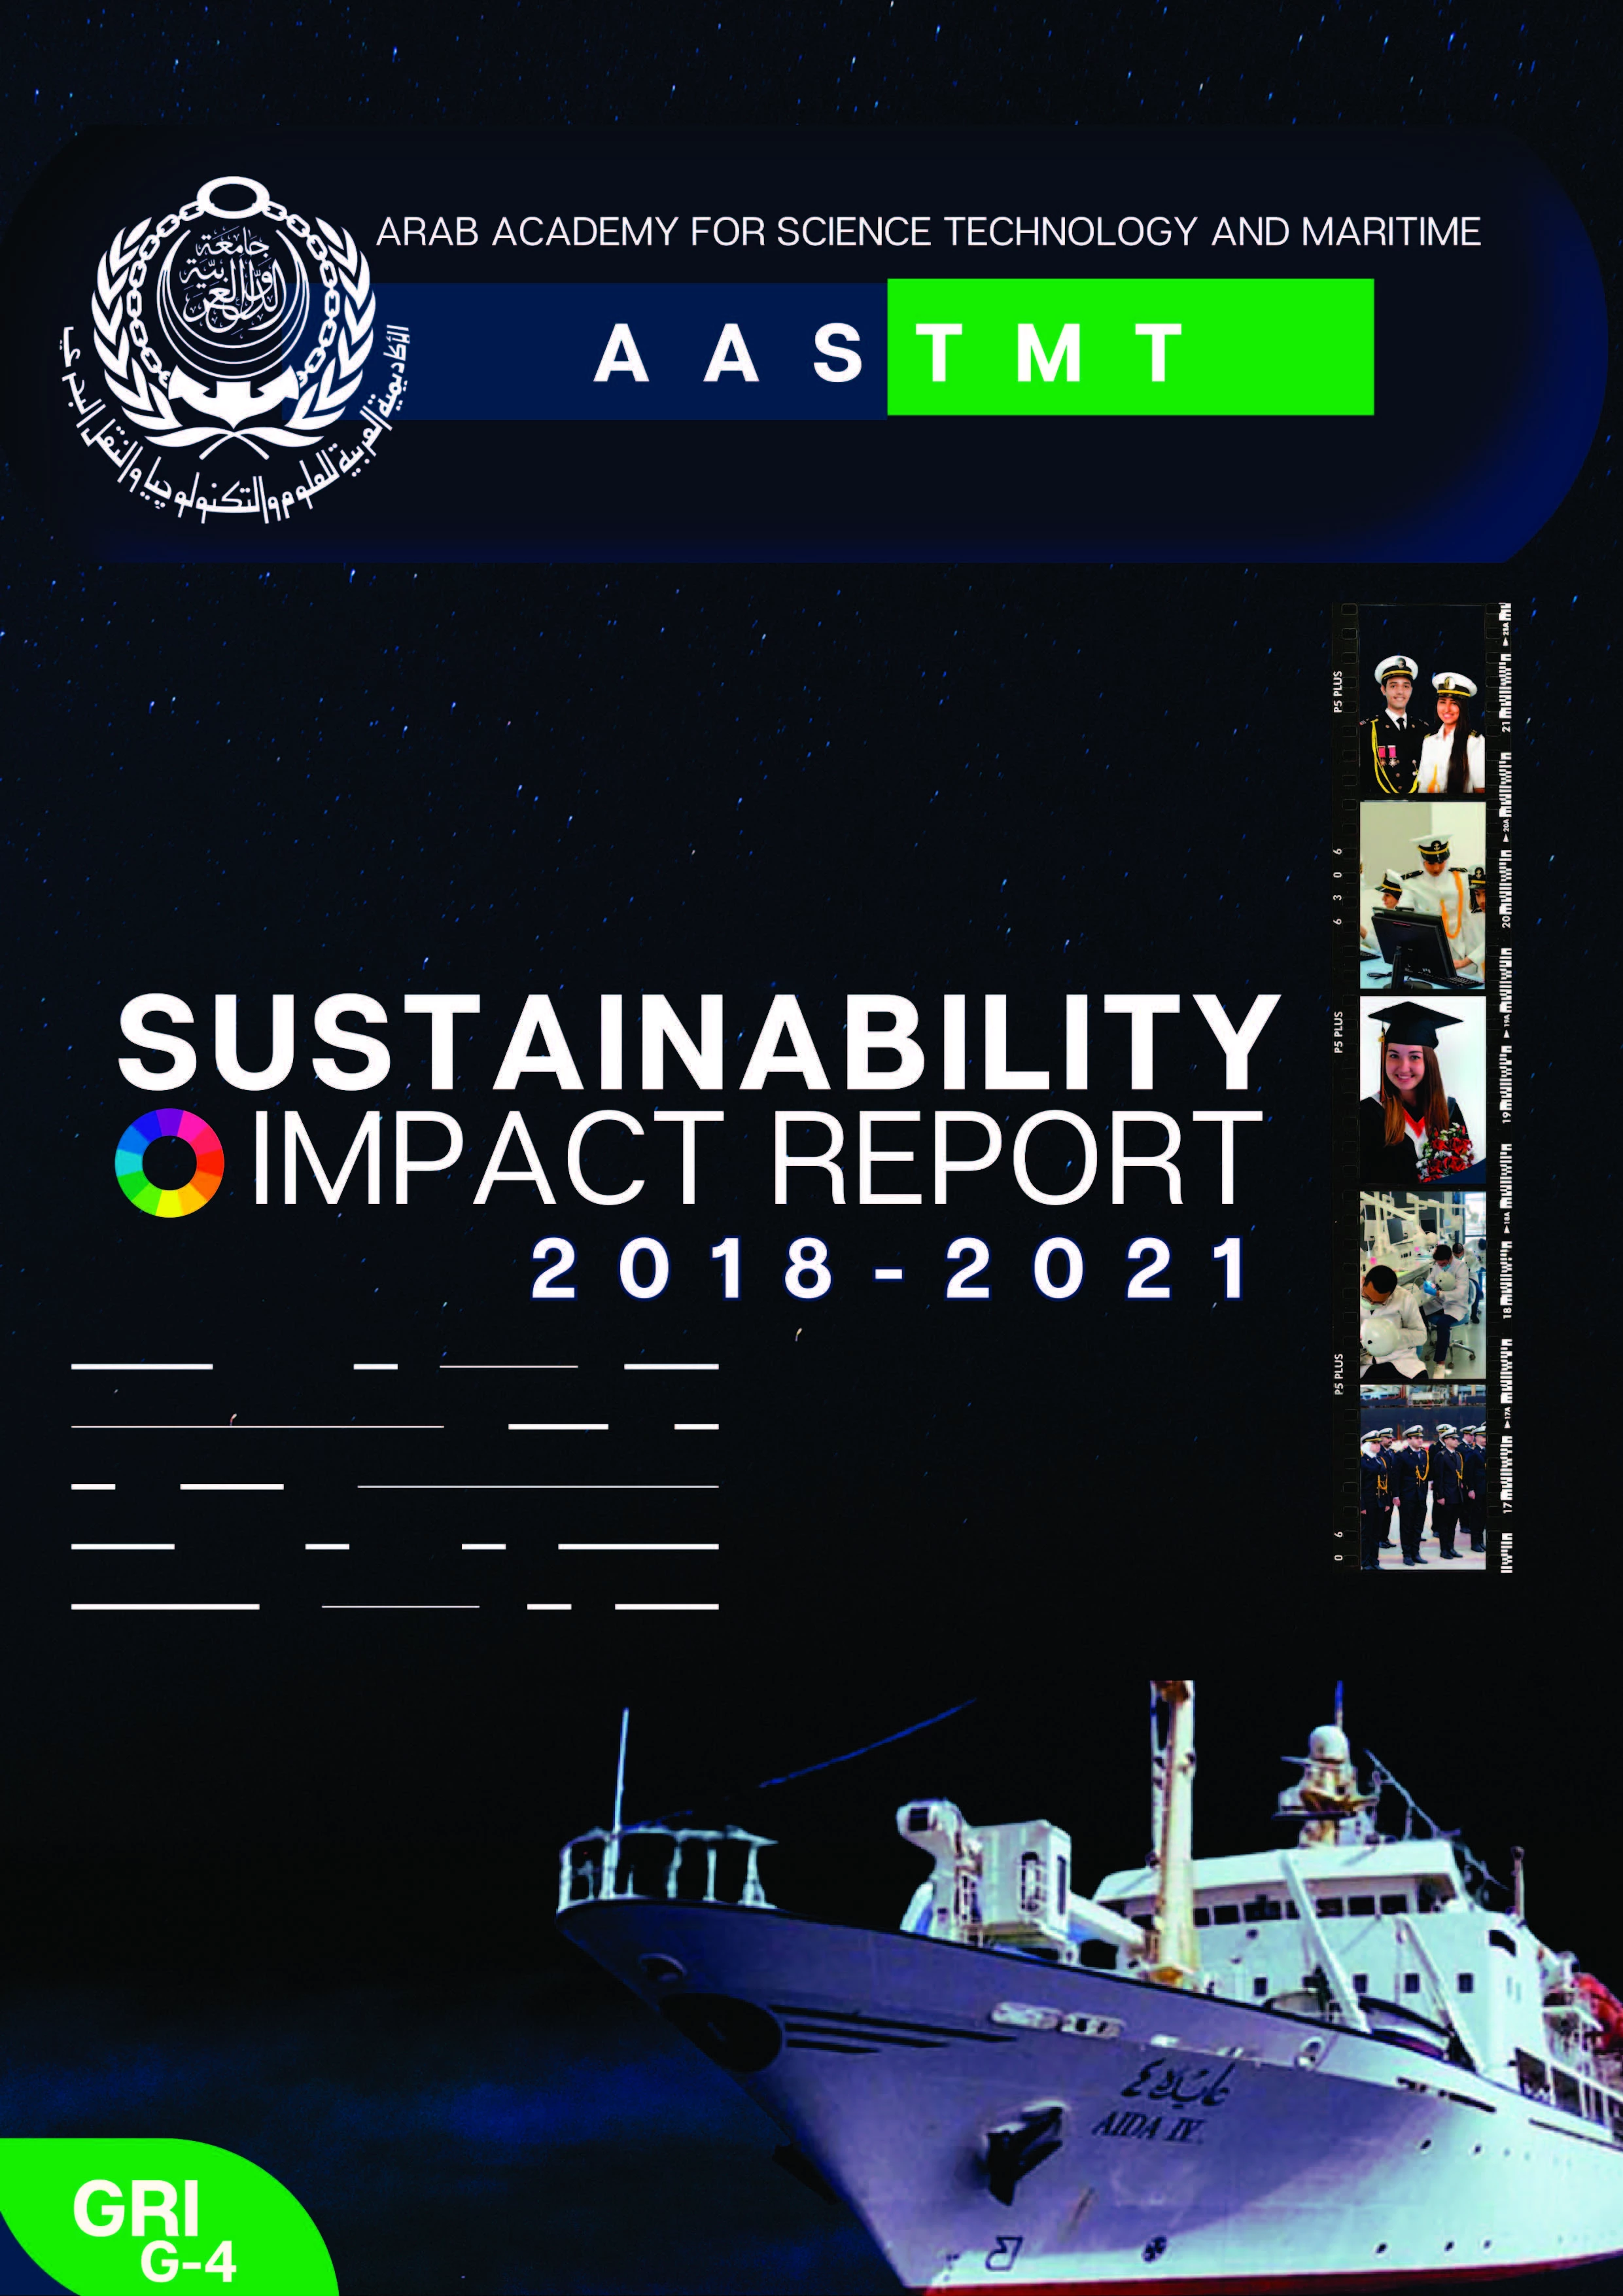 AASTMT Sustainability Report 2018-2021